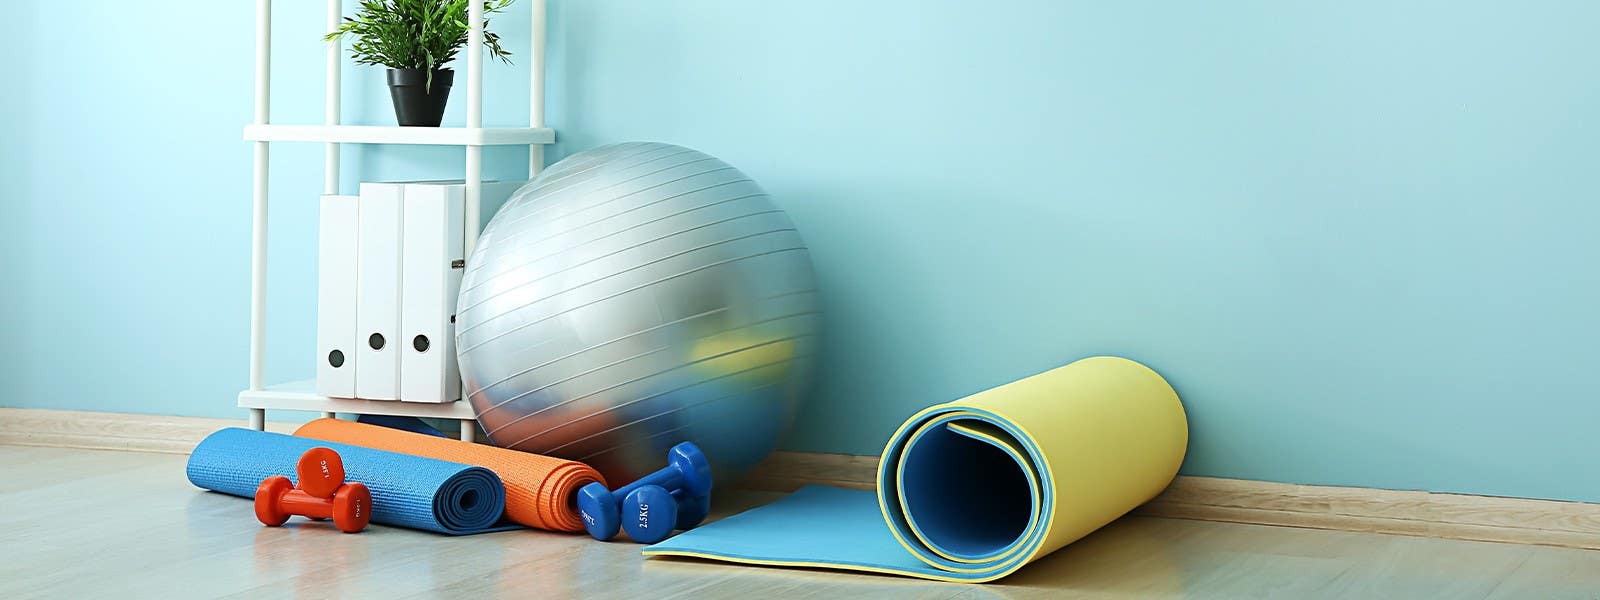 Easy Pilates Prop Alternatives You Can Find At Home